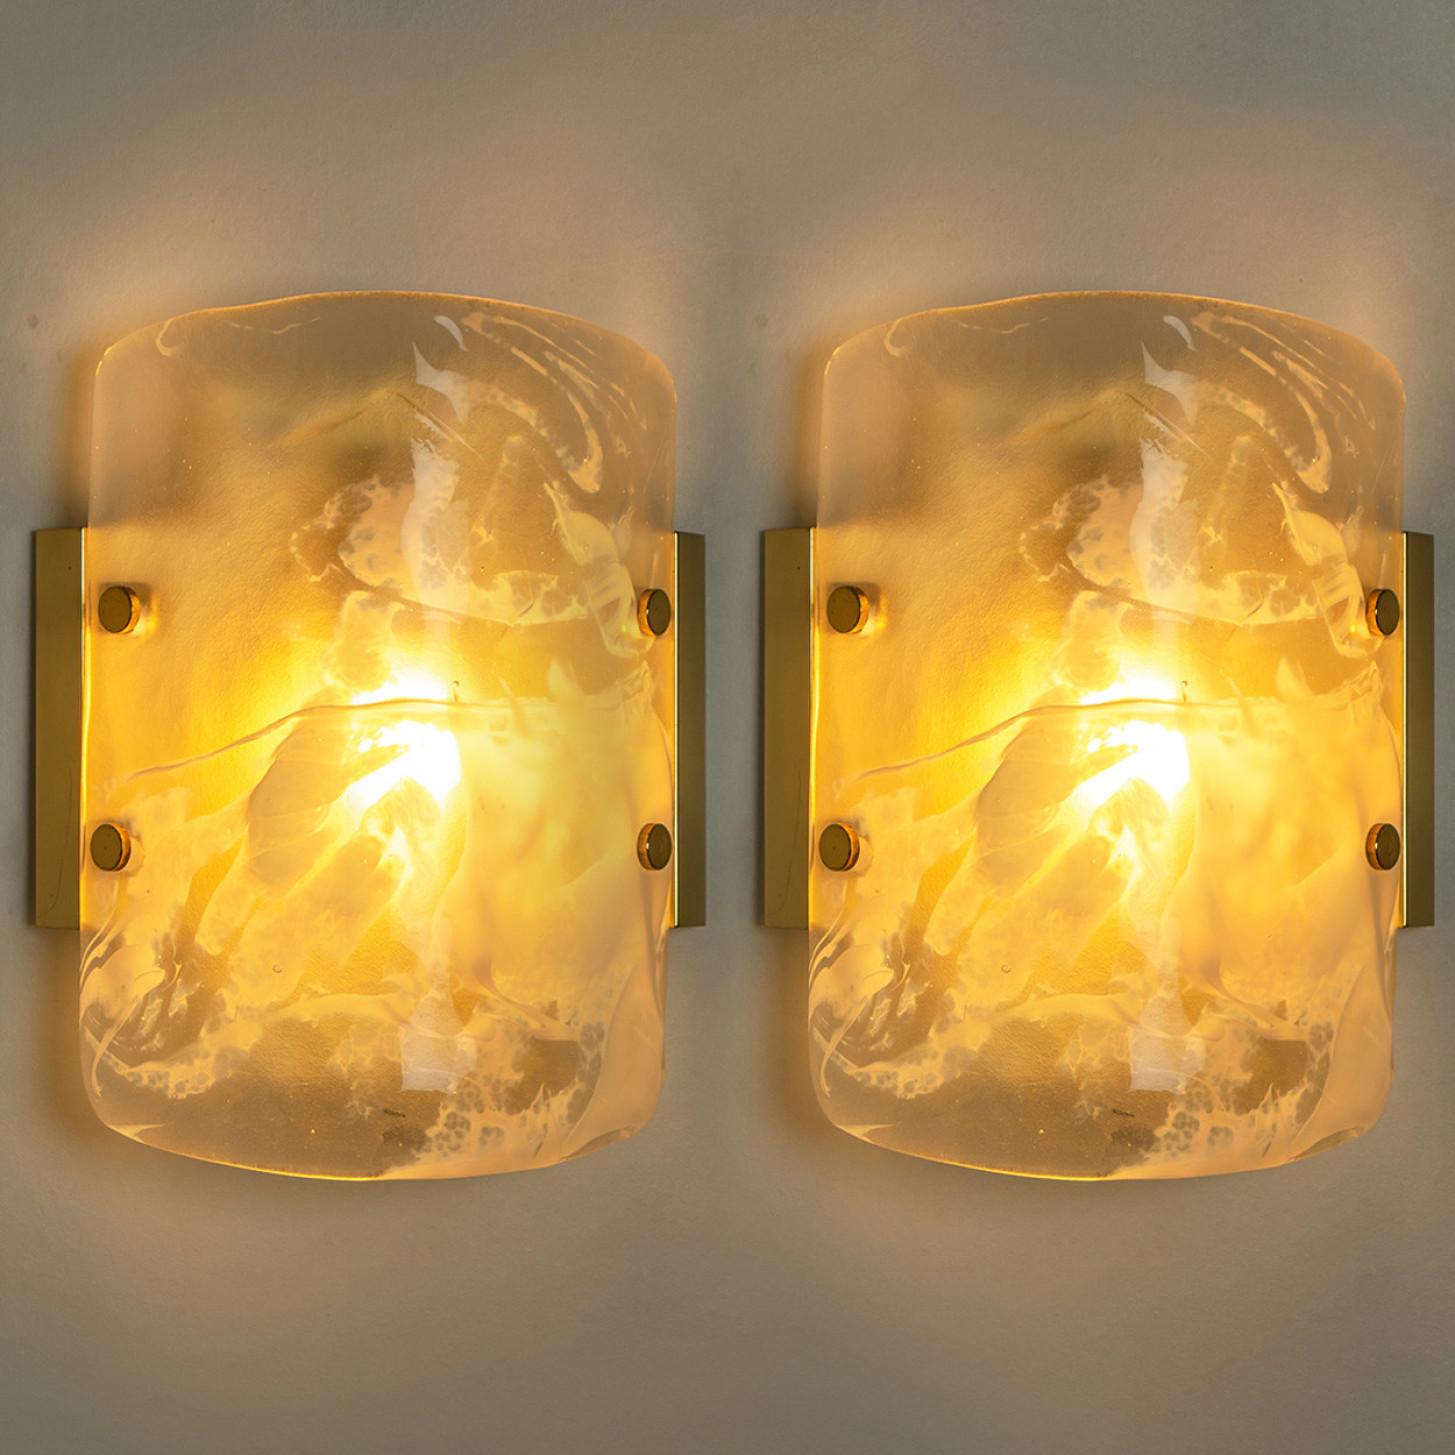 Hillebrand Marble Murano Glass Wall Light Fixtures, 1960s For Sale 4